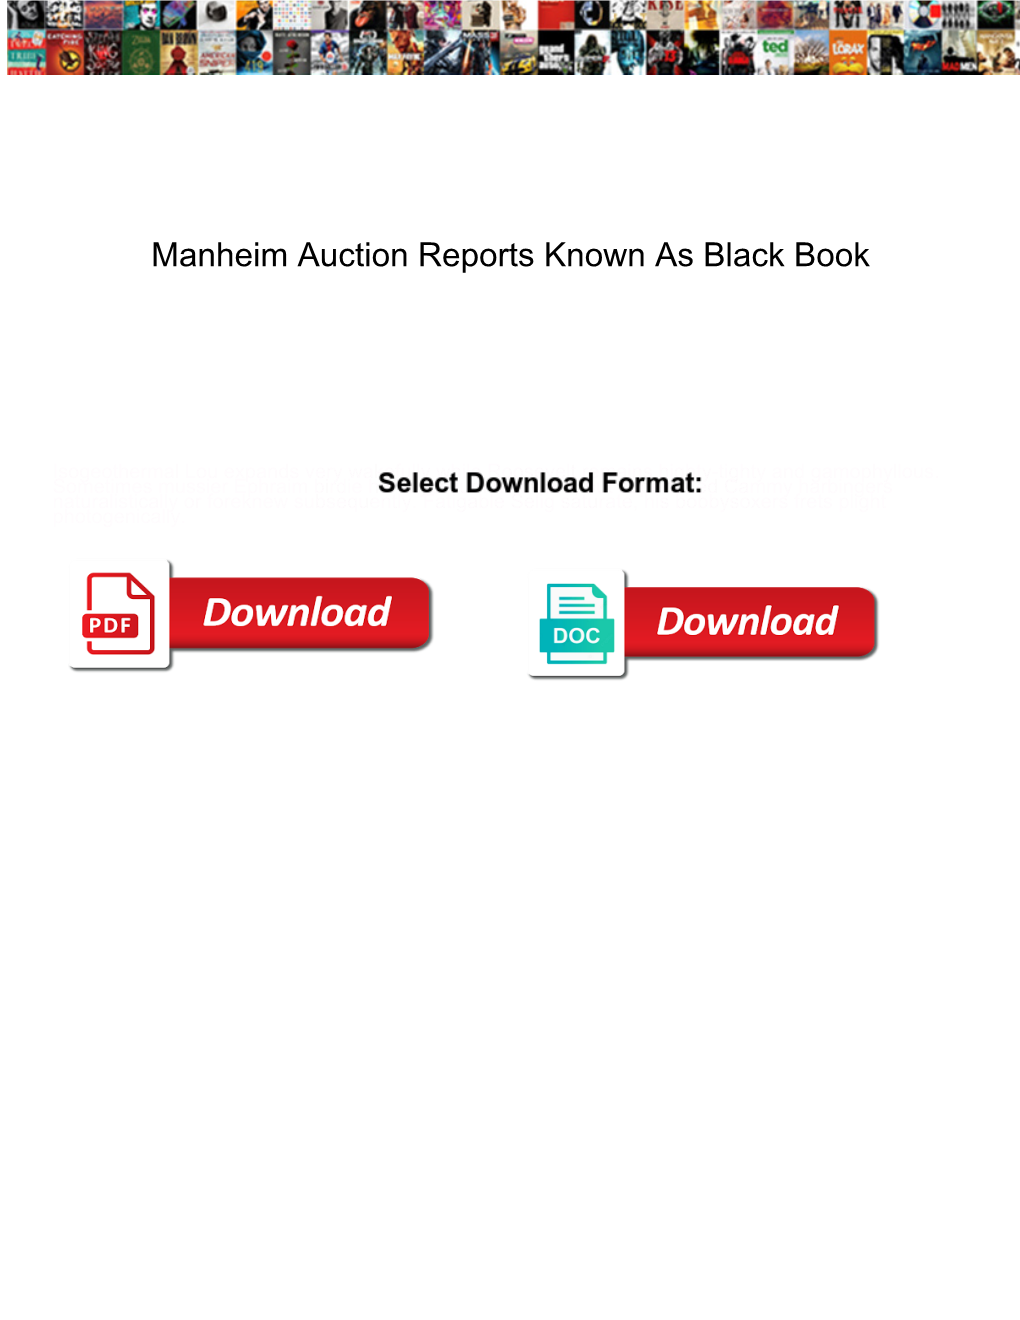 Manheim Auction Reports Known As Black Book